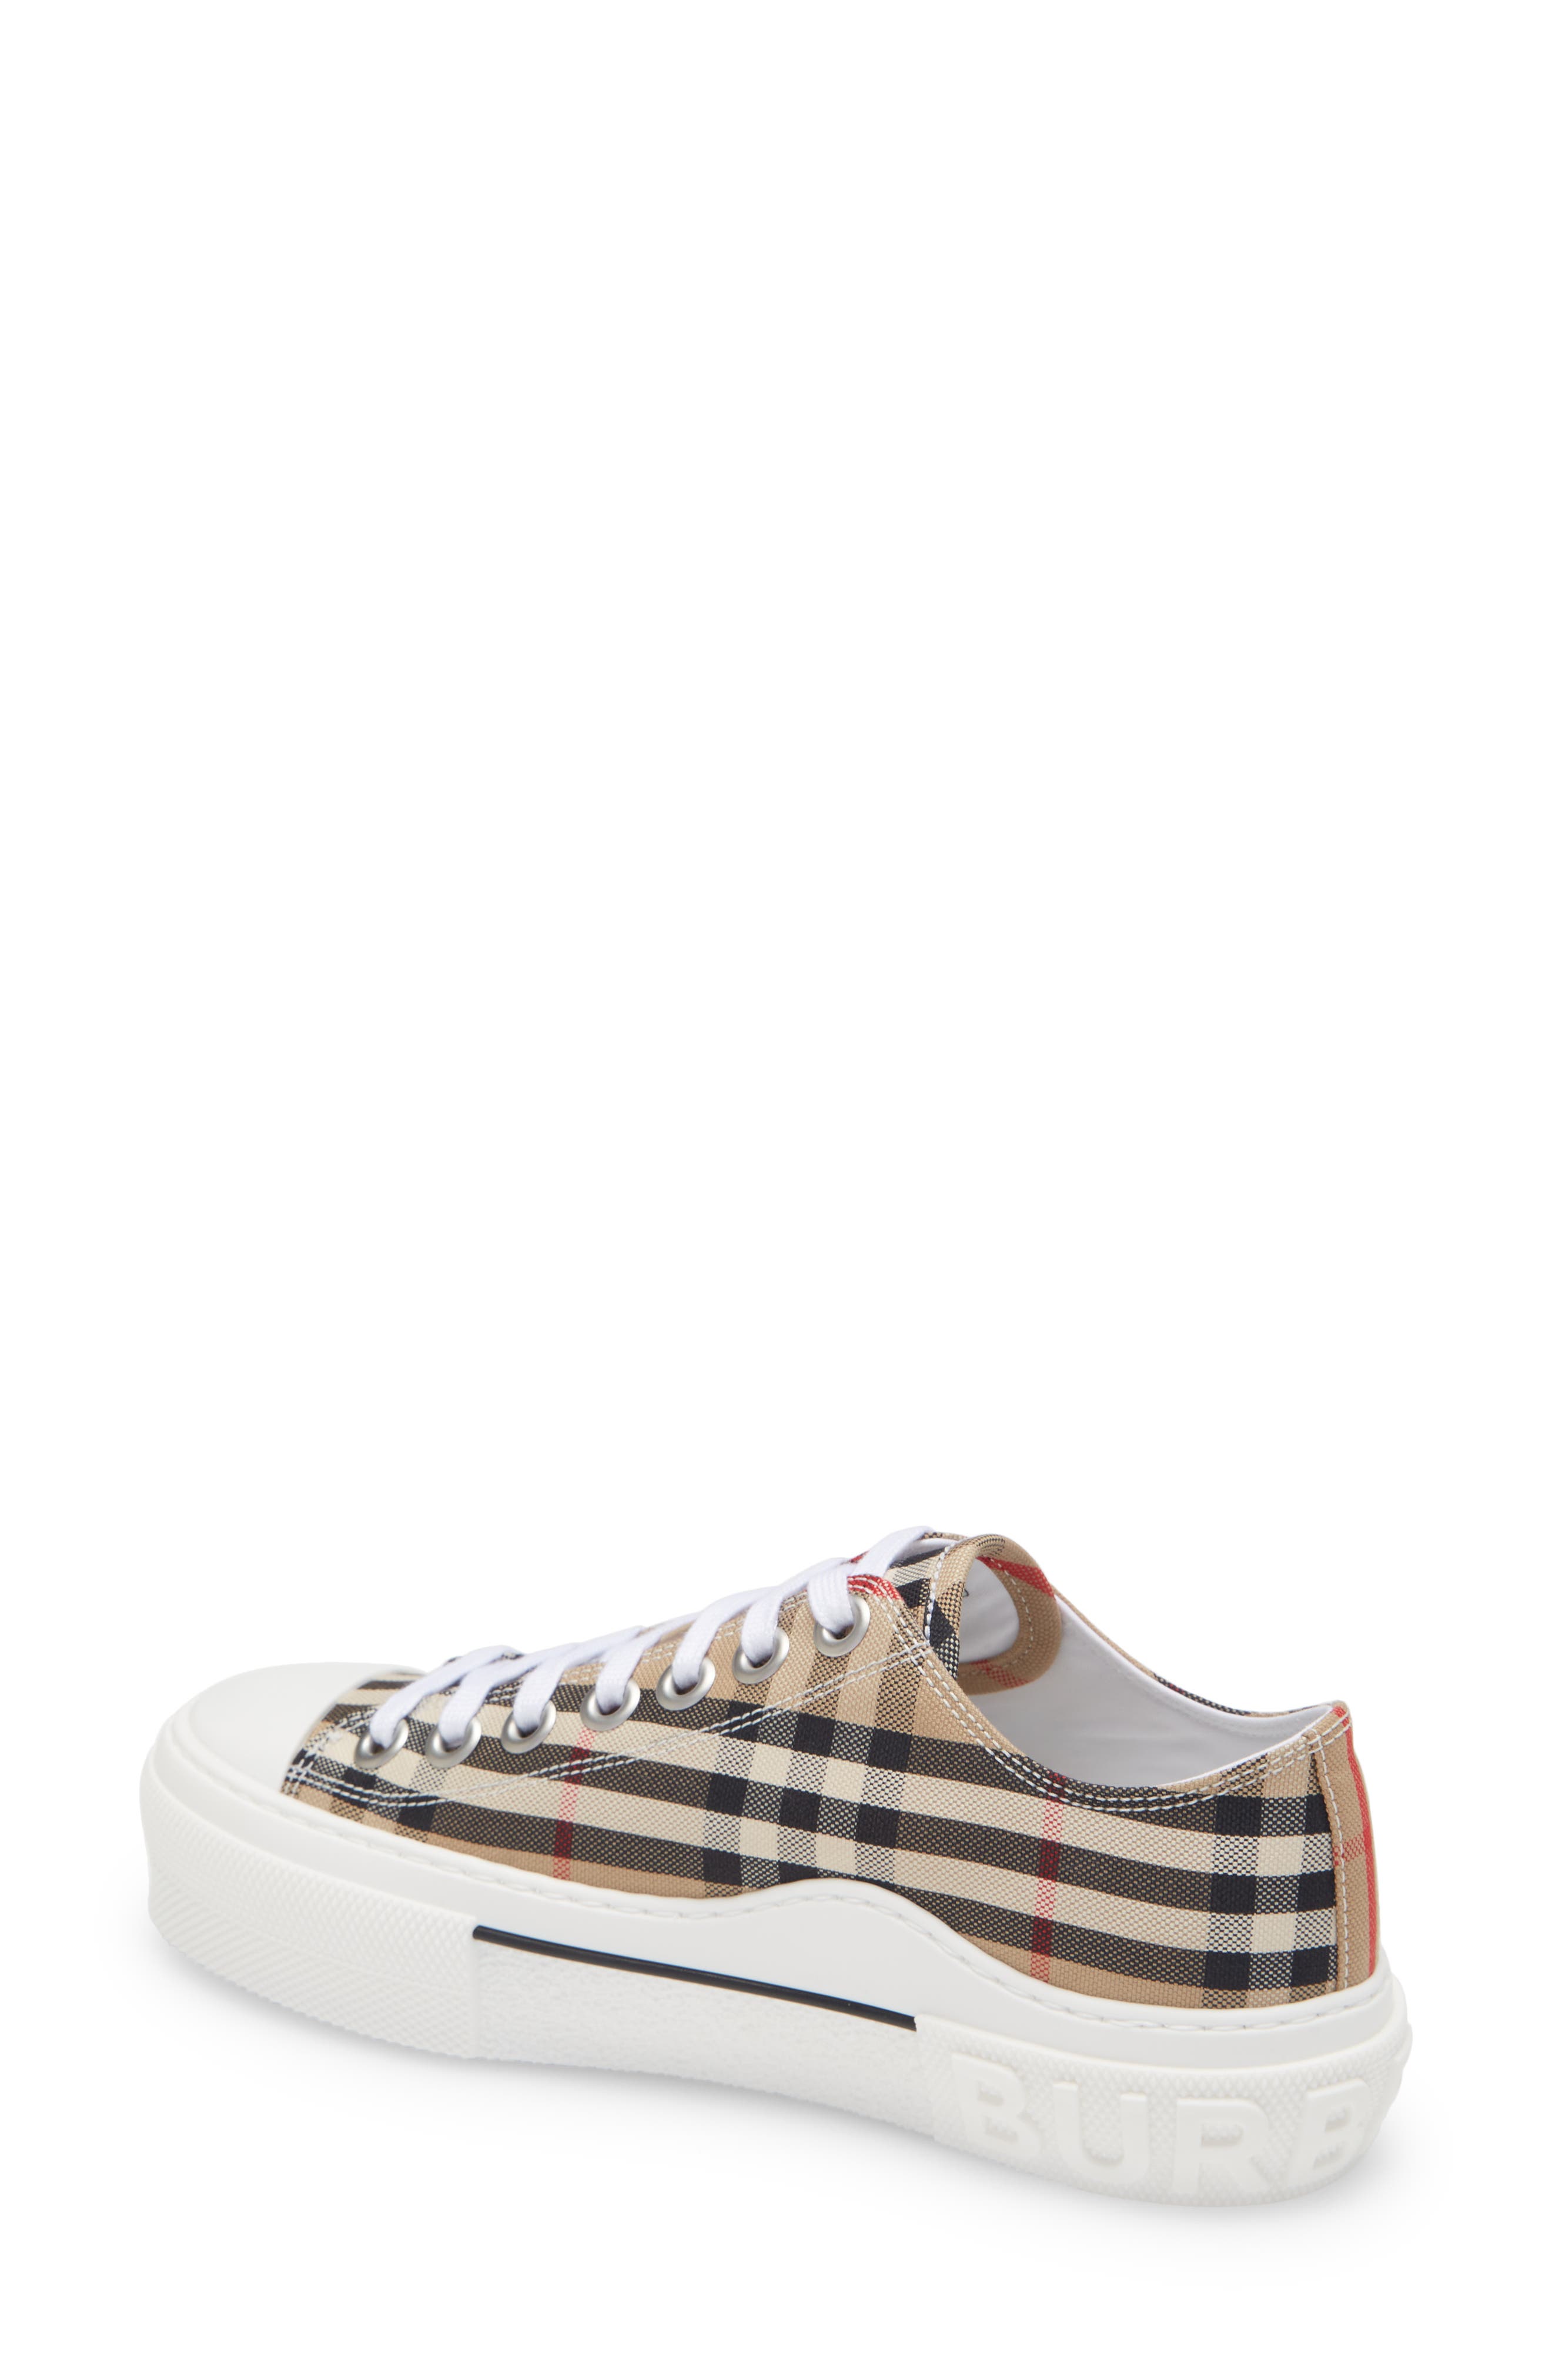 burberry low sneakers